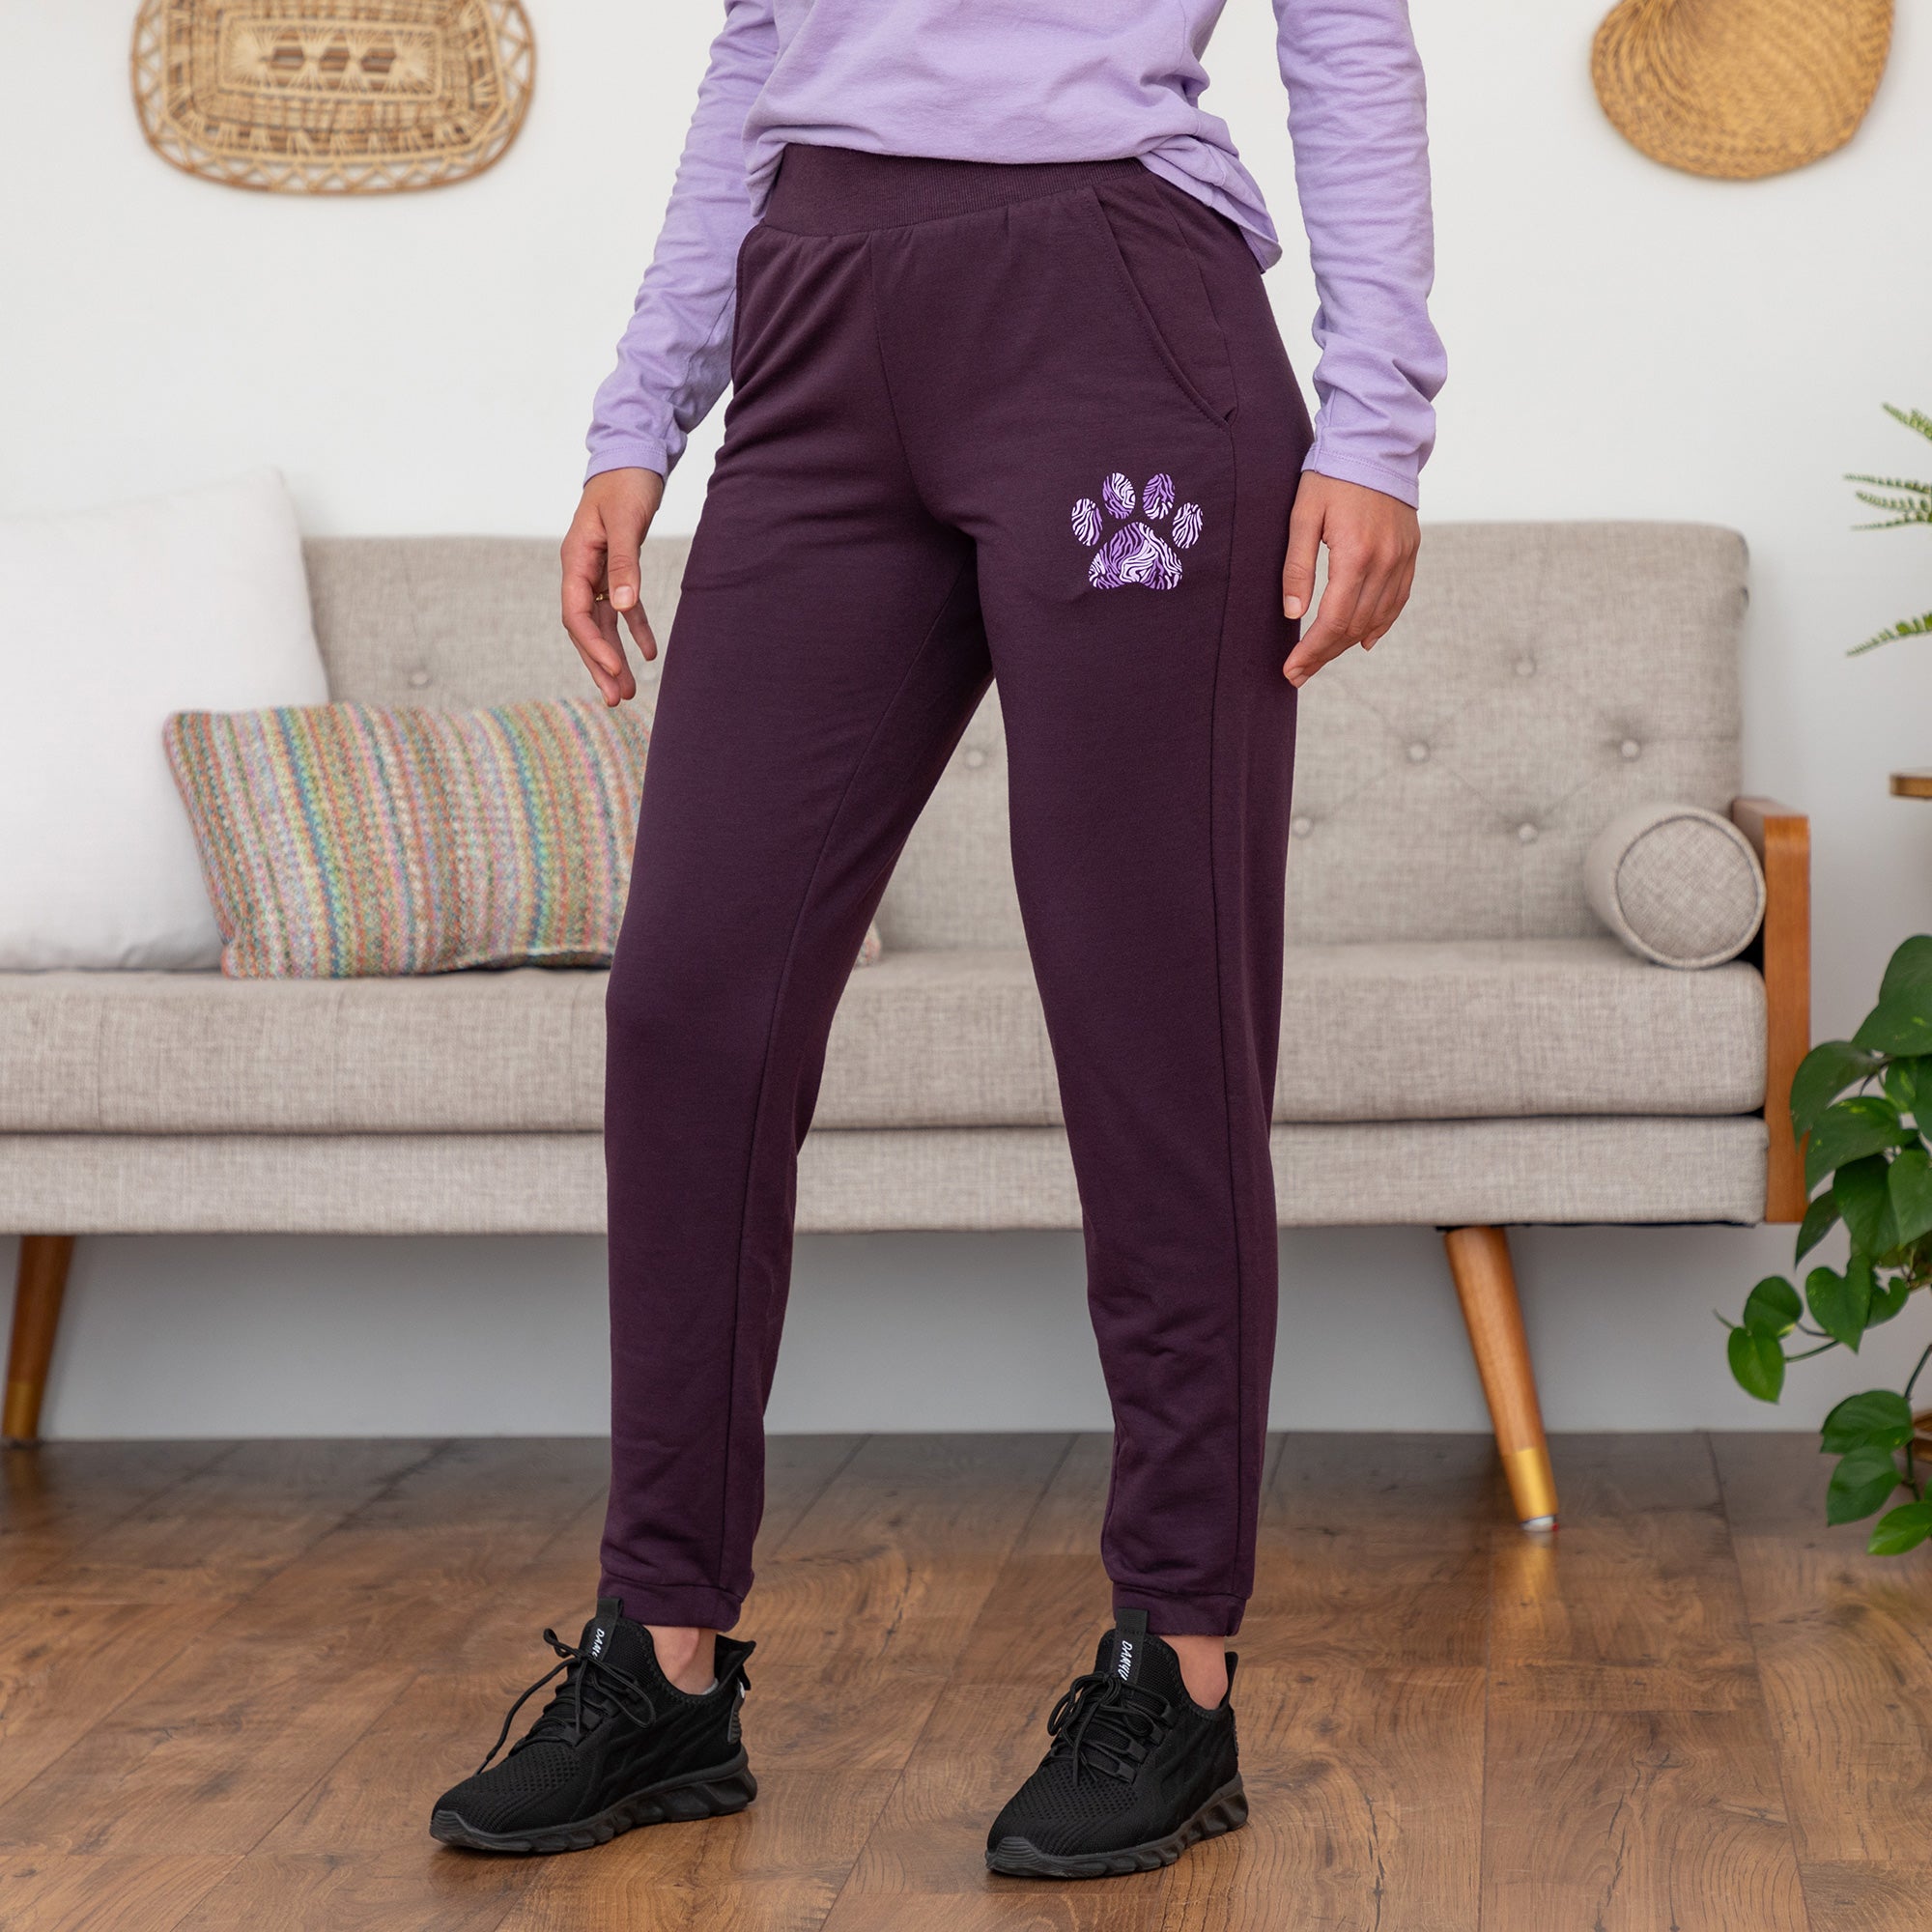 Paw Print Lightweight Tapered Sweatpants With Pockets & Elastic Waist - S